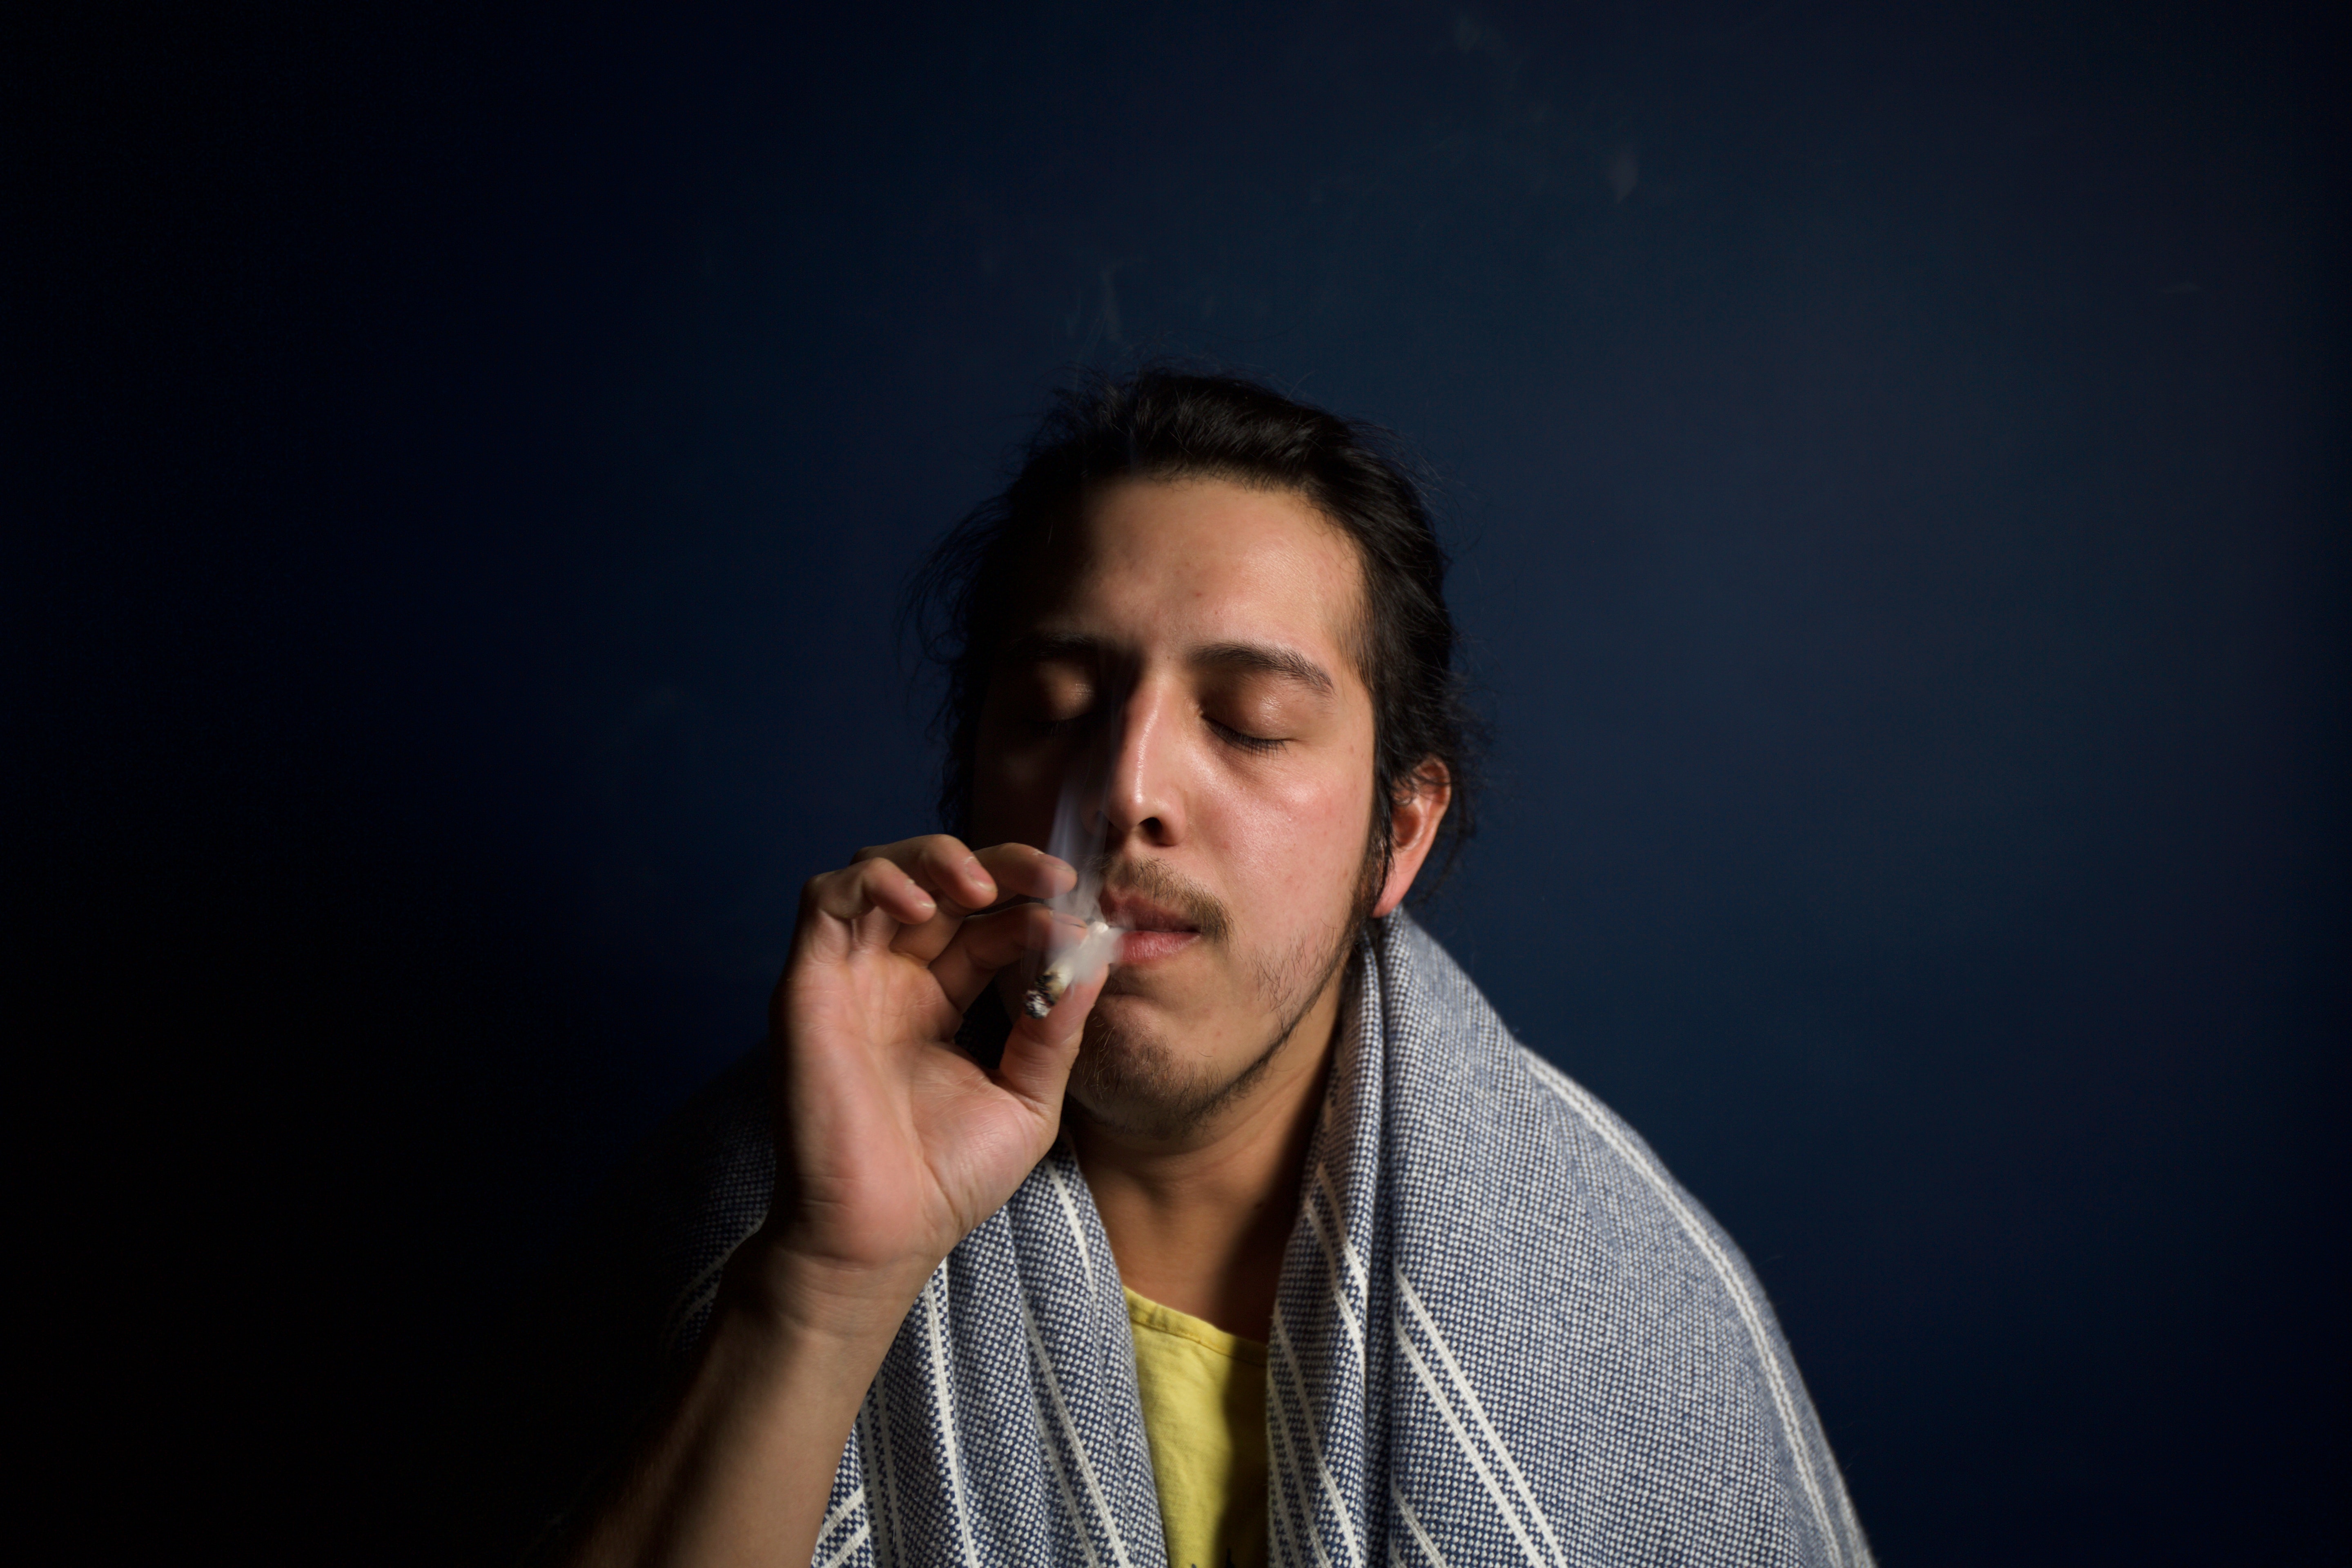 A millenial young man wearing a scarf on his shoulder deeply immersed in his smoking of cannabis.